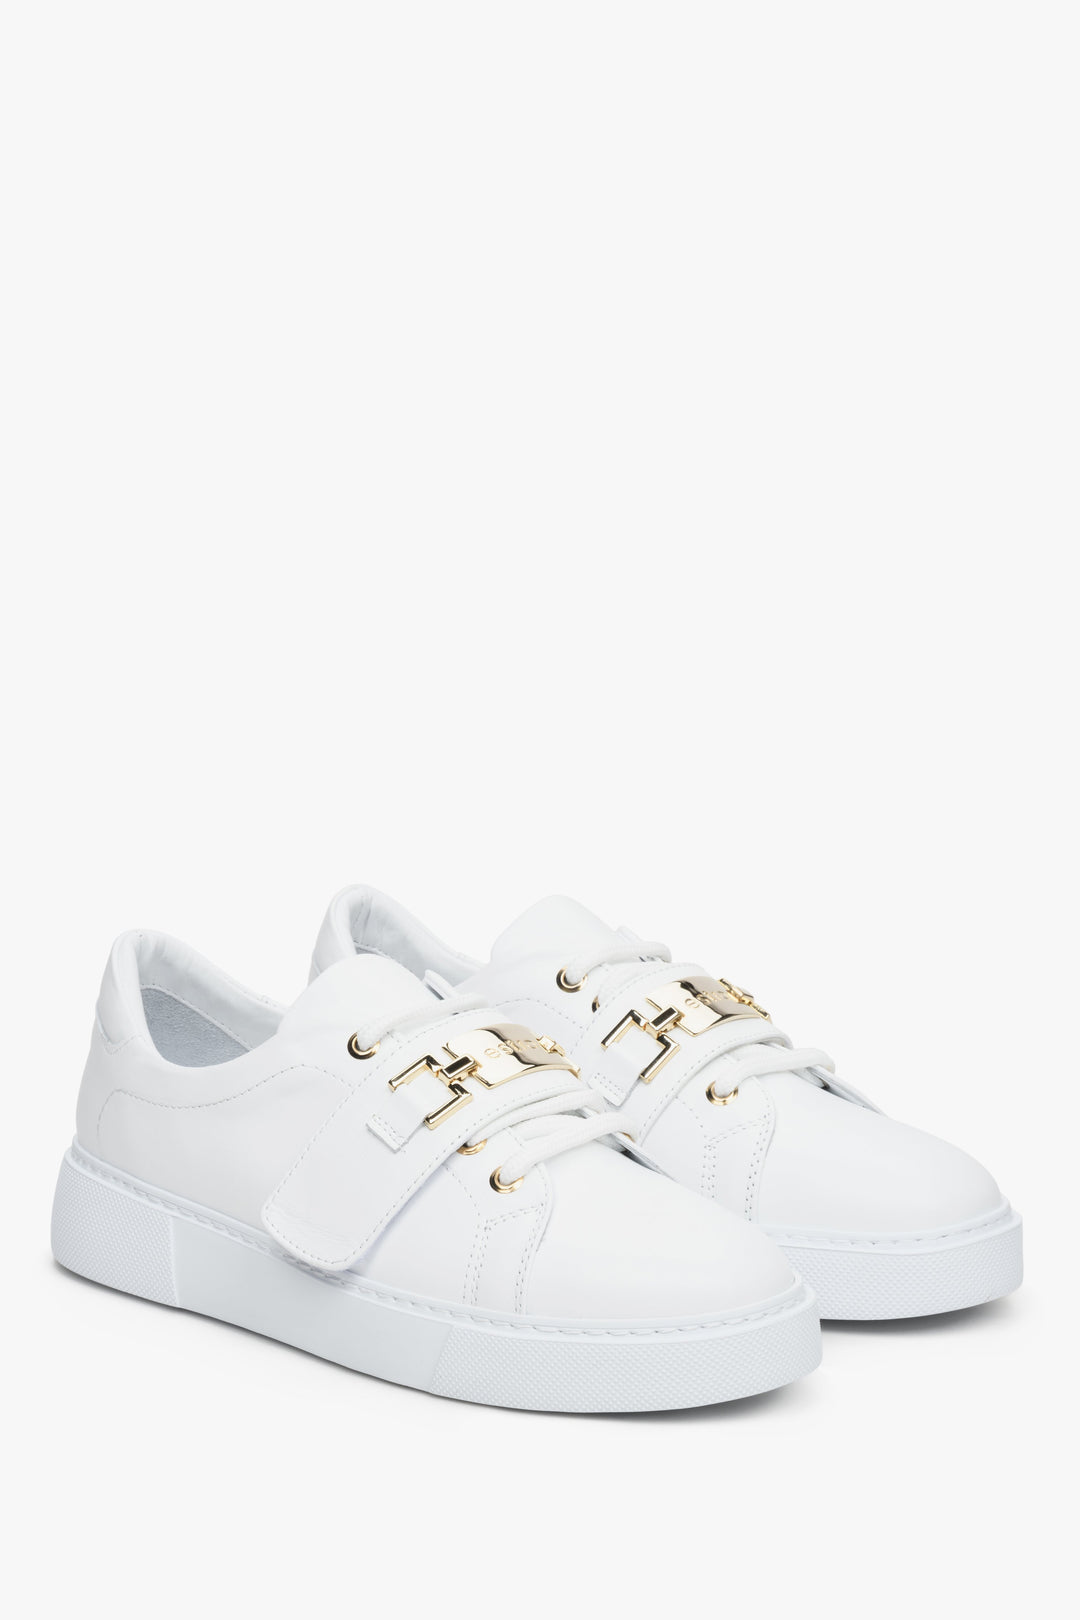 Women's white leather sneakers by Estro with a gold embellishment.